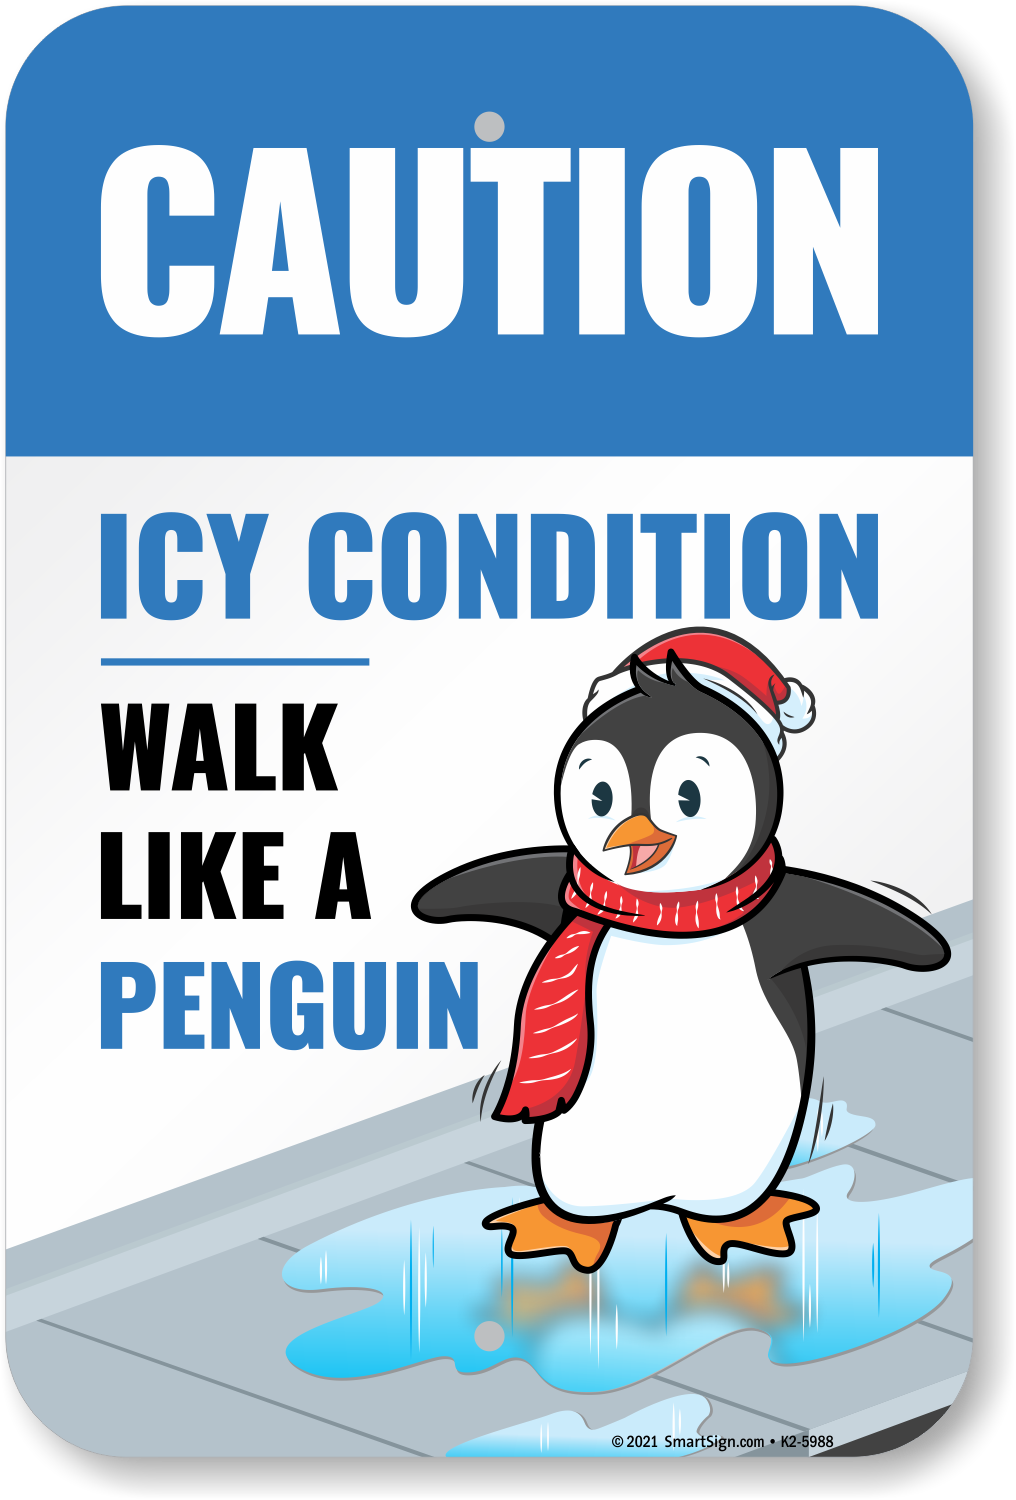 Caution: Icy Condition, Walk Like a Penguin -K2-5988 - from ,  SKU: K2-5988